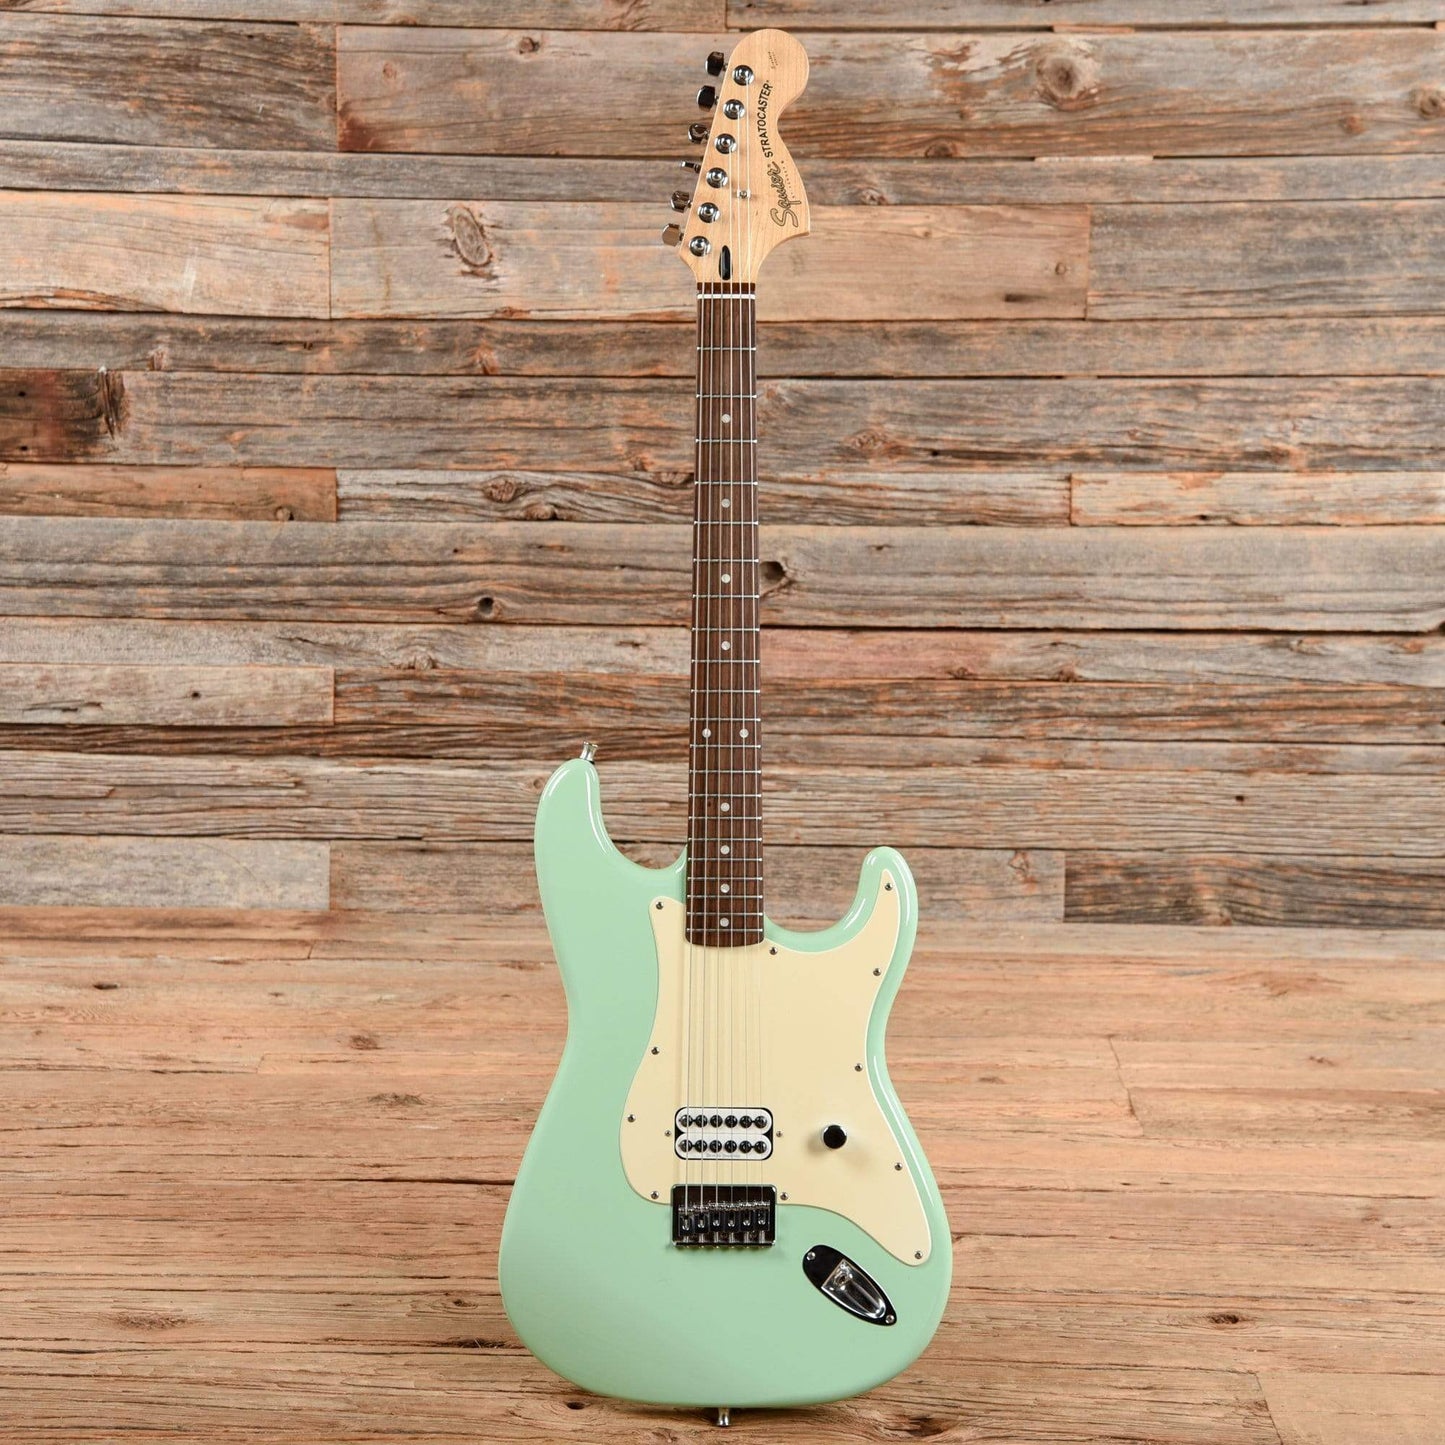 Squier Tom Delonge Stratocaster Surf Green 2003 Electric Guitars / Solid Body